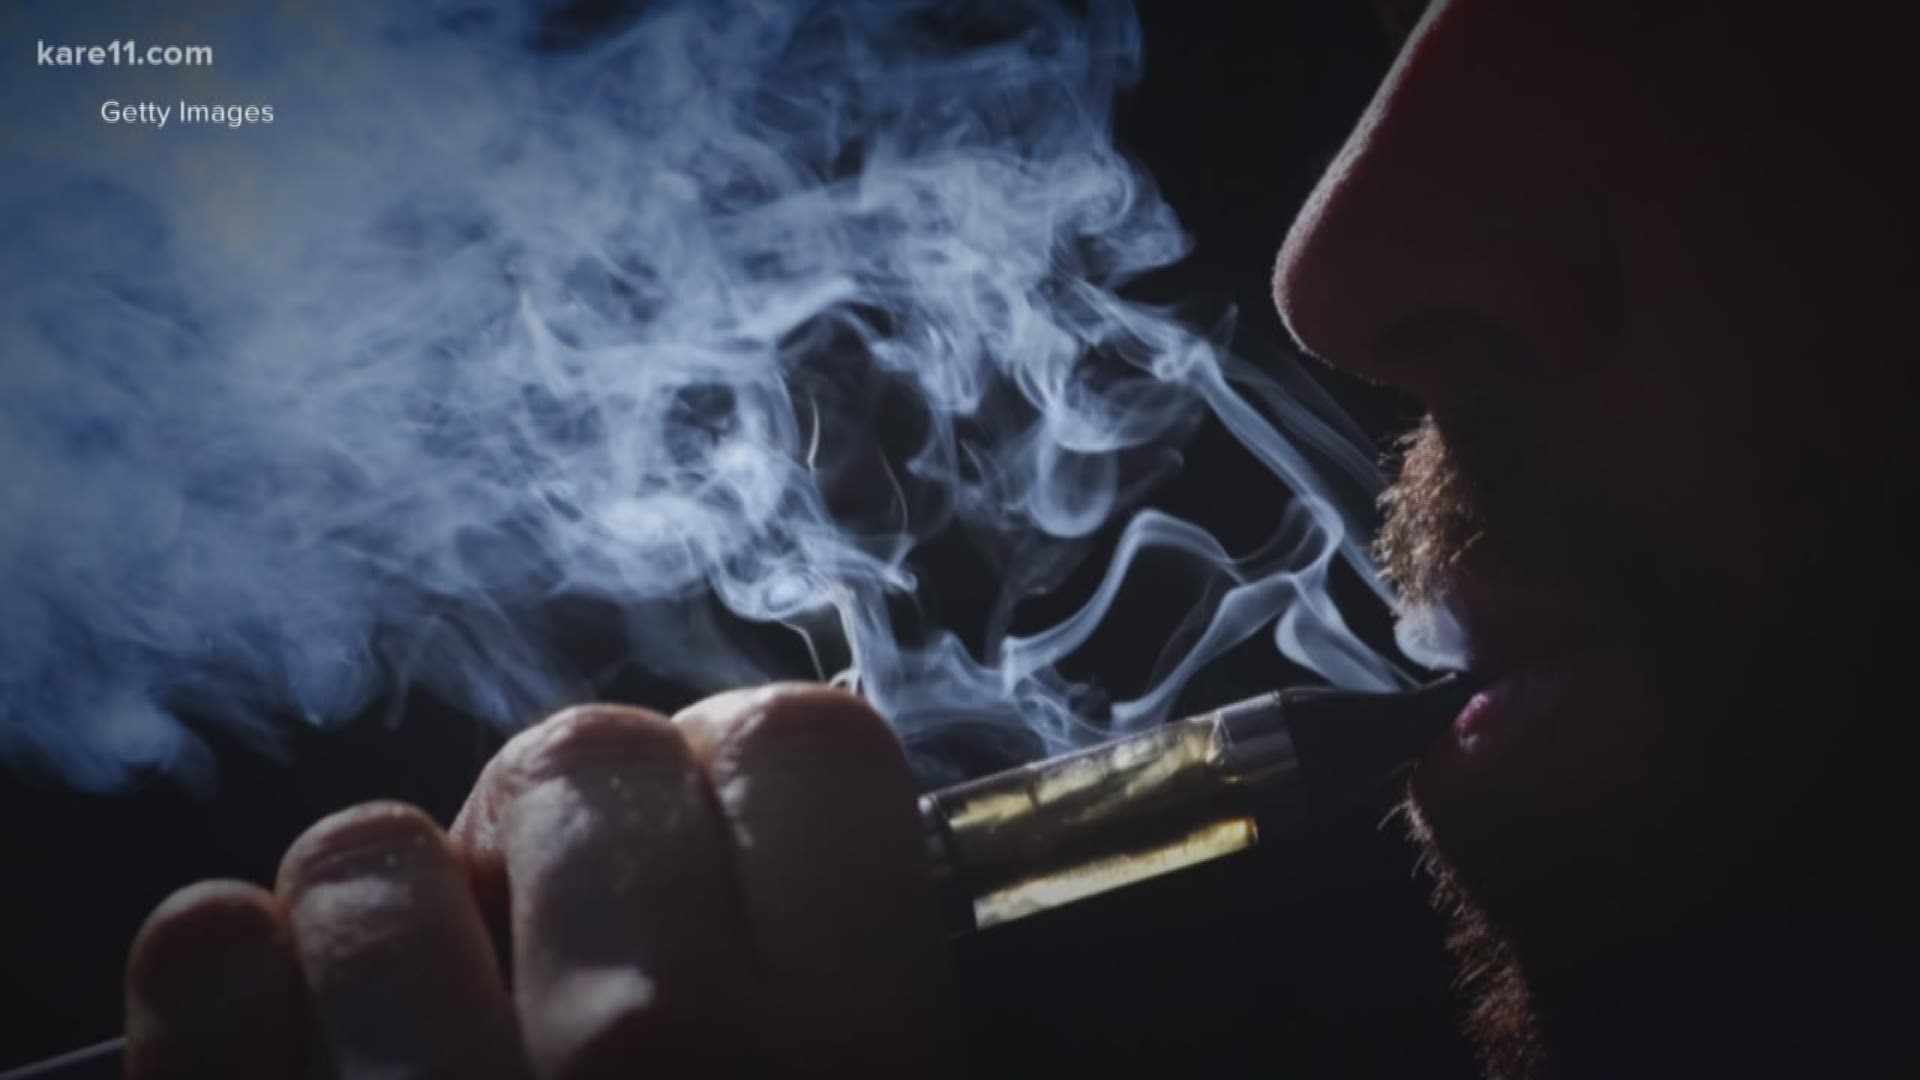 We're following up on the vaping story we broke last night at 10. We told you how the state would issue an alert today after four teens were hospitalized with severe lung damage from vaping.